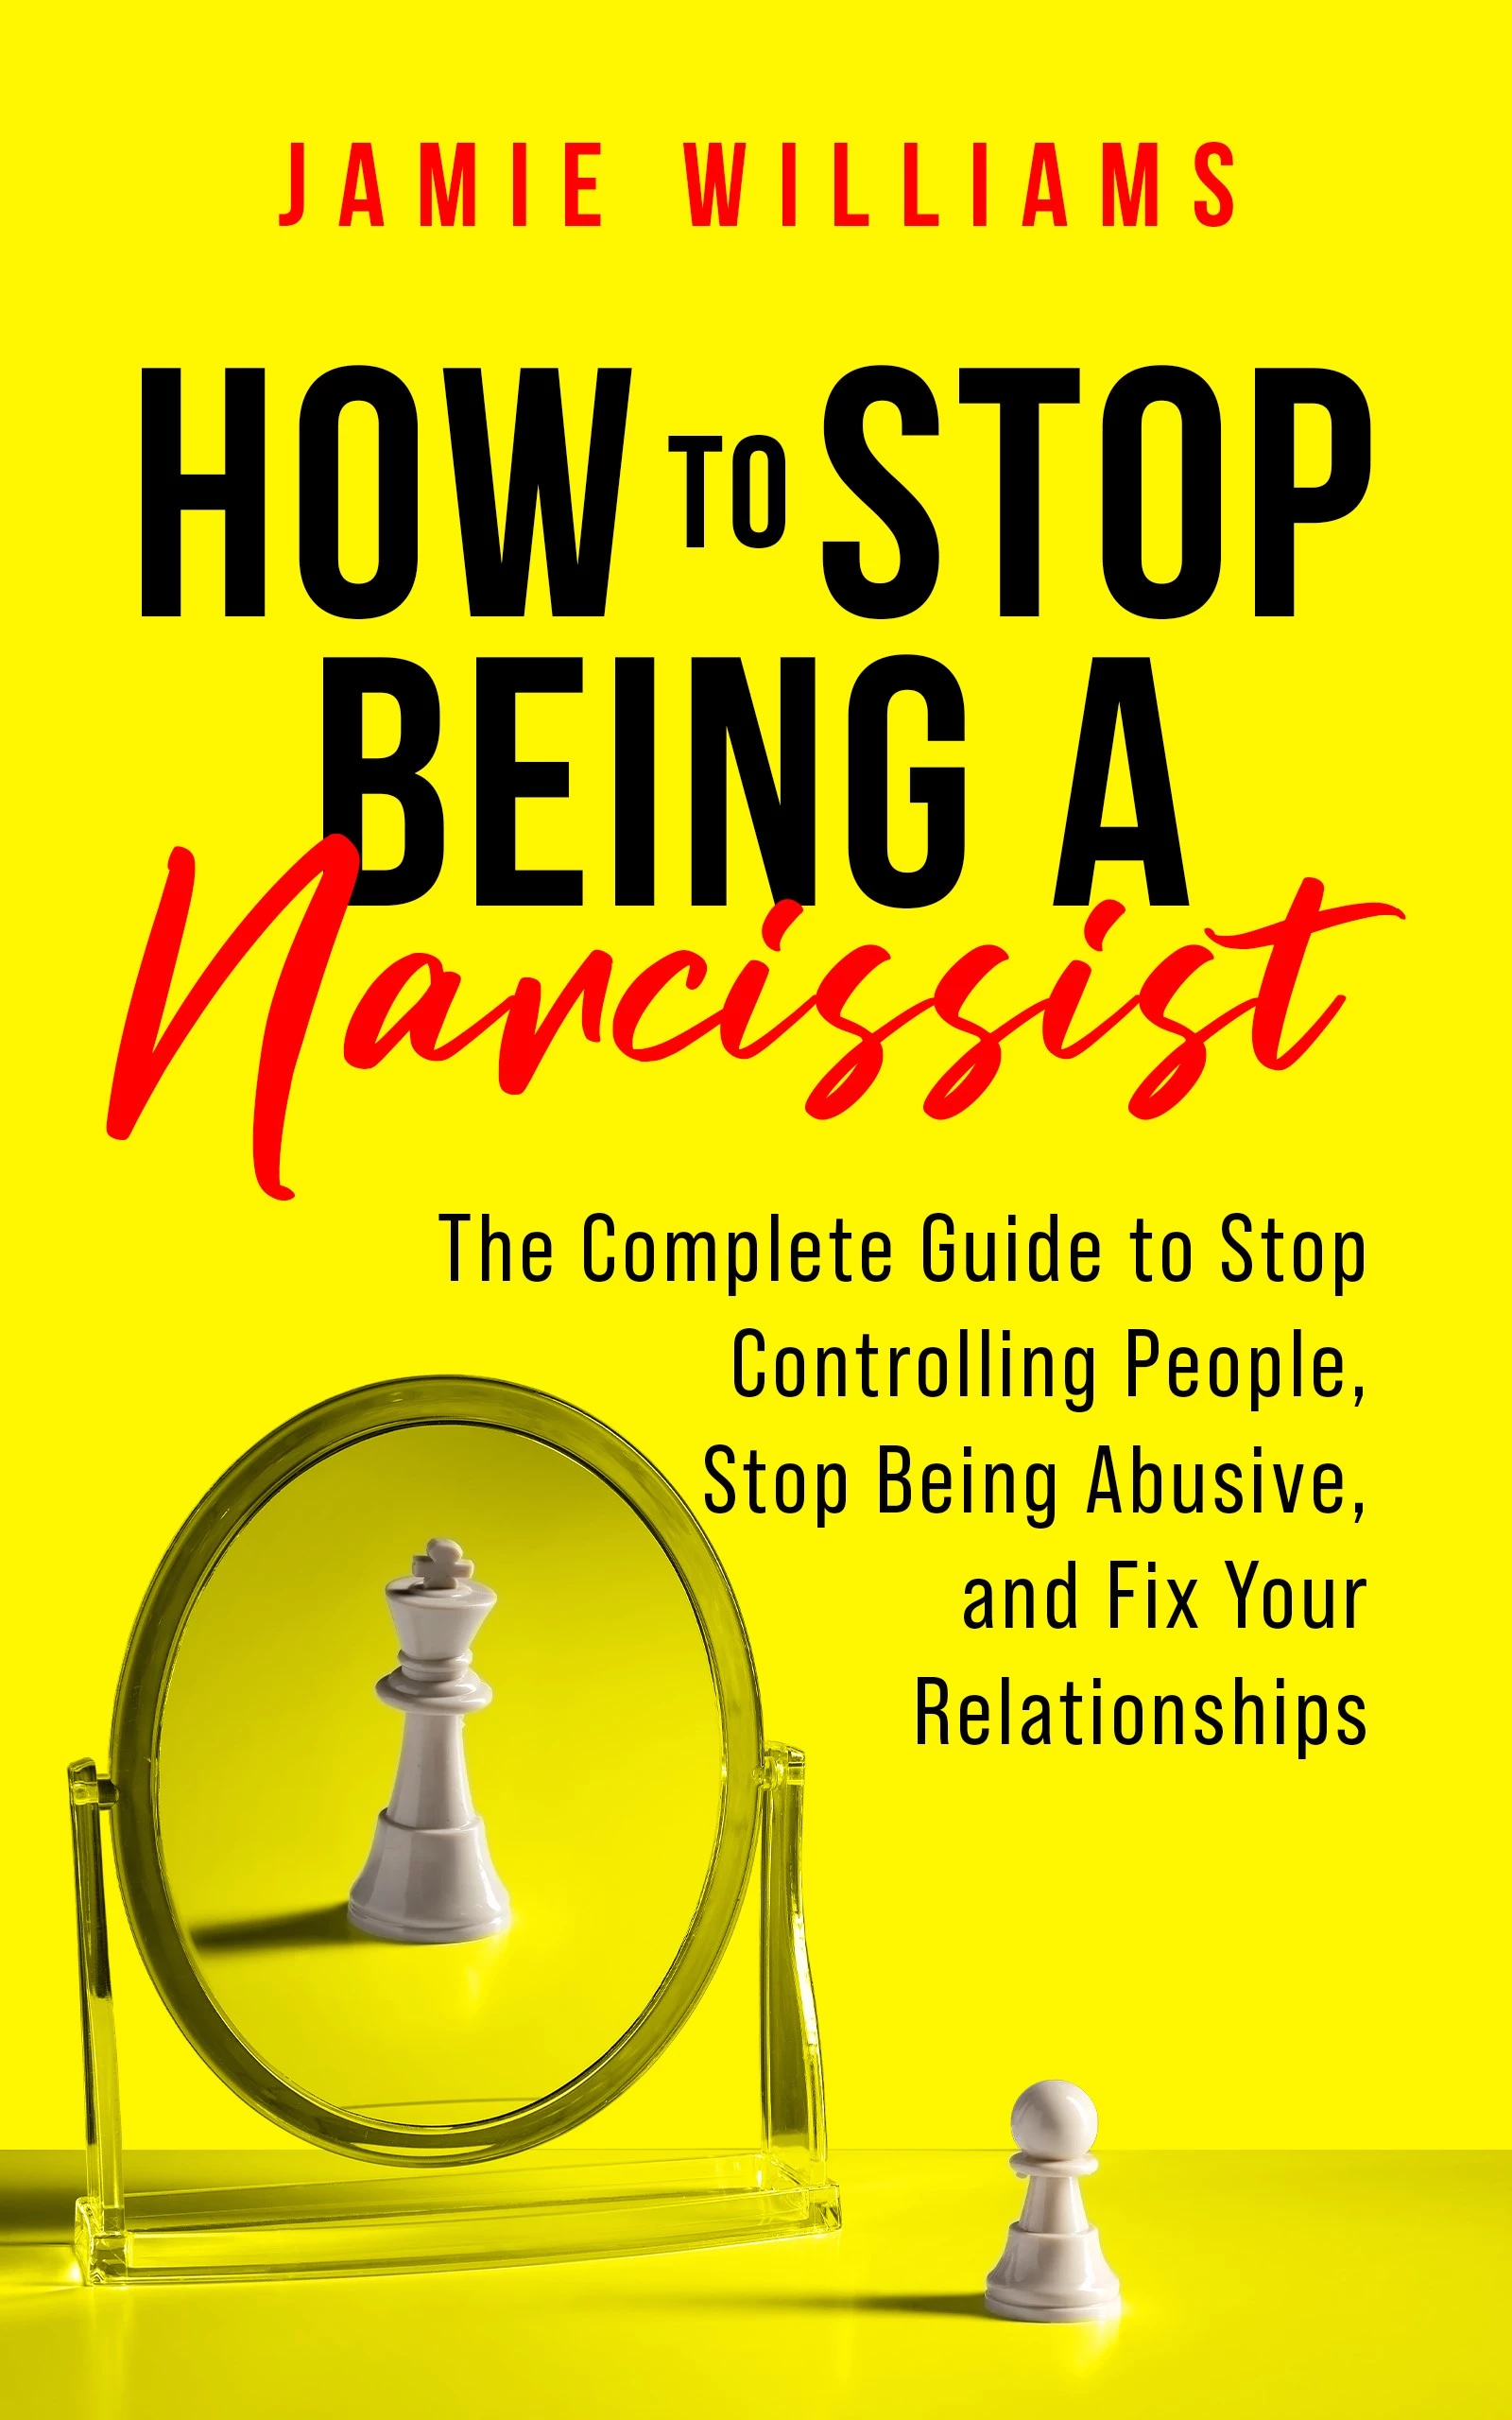 How to Stop Being a Narcissist: The Complete Guide to Stop Controlling People, Stop Being Abusive, and Fix Your Relationships